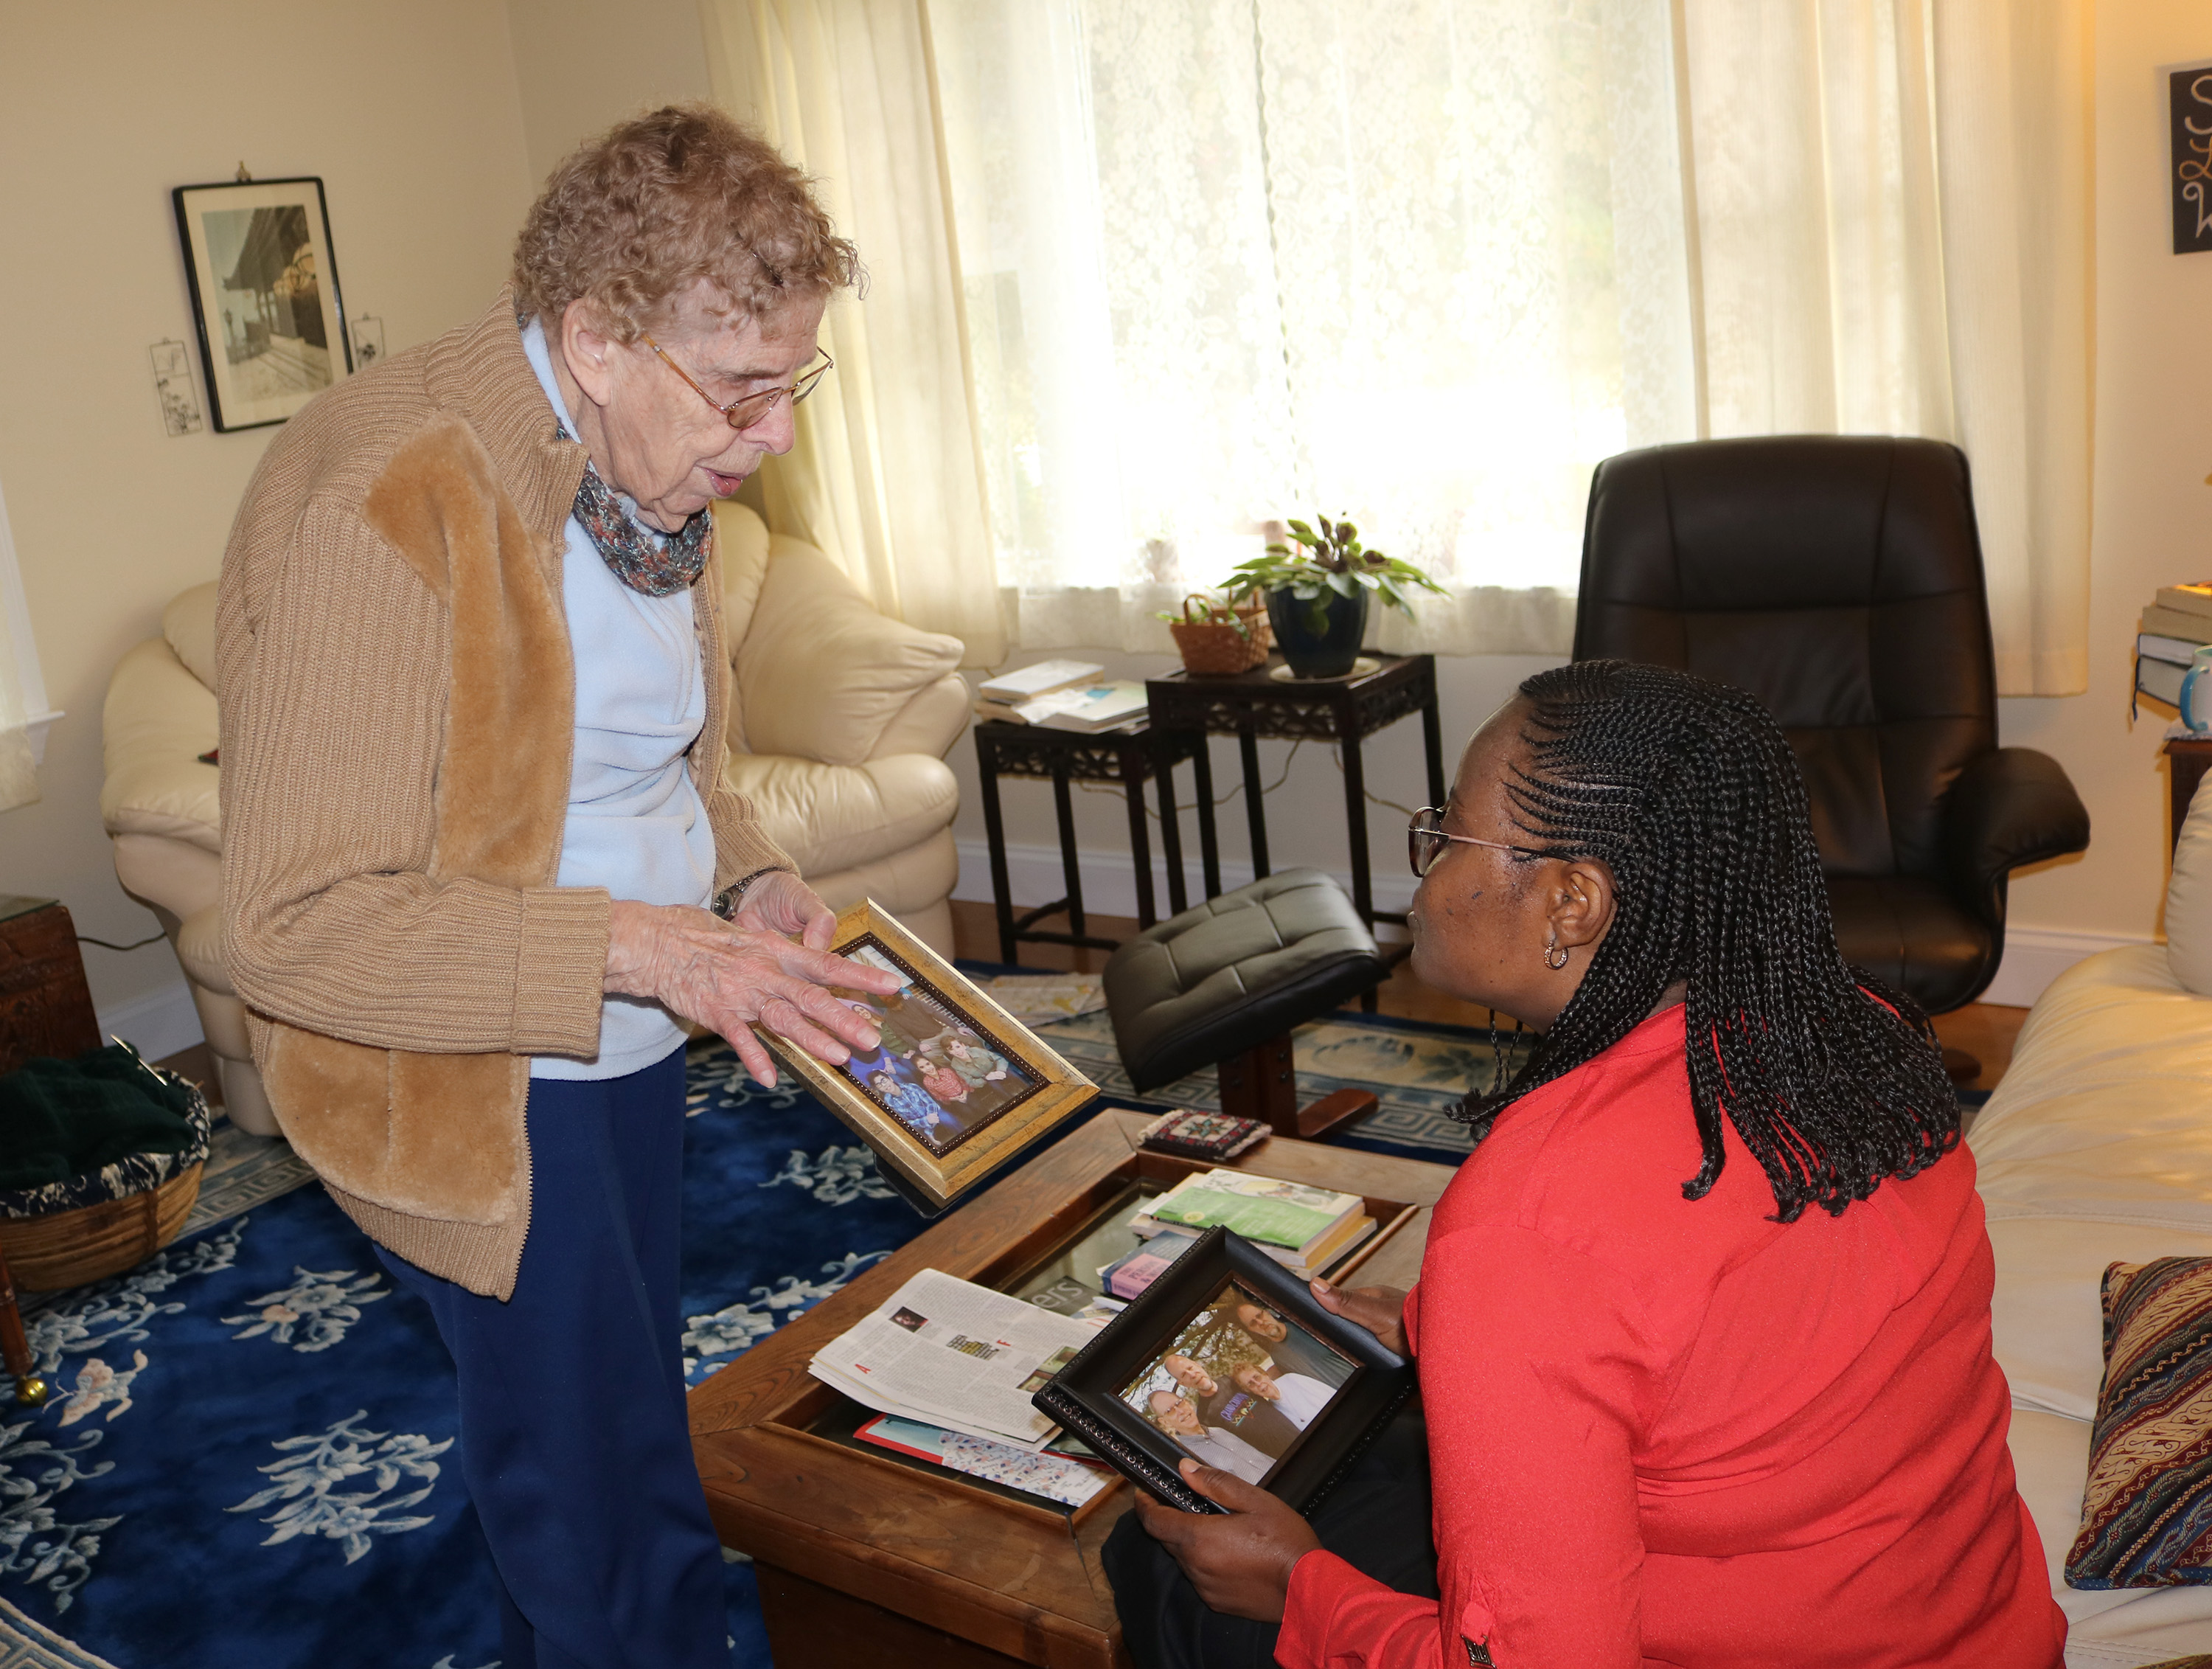 Dusty Knisley (left) of Calvary United Methodist Church in Dillsburg, Pa., shares her family story and photos with the Rev. Daisy Gbloh from Sierra Leone. Knisley hosted a team from the Sierra Leone Conference at her home. Photo by Phileas Jusu, UMNS.